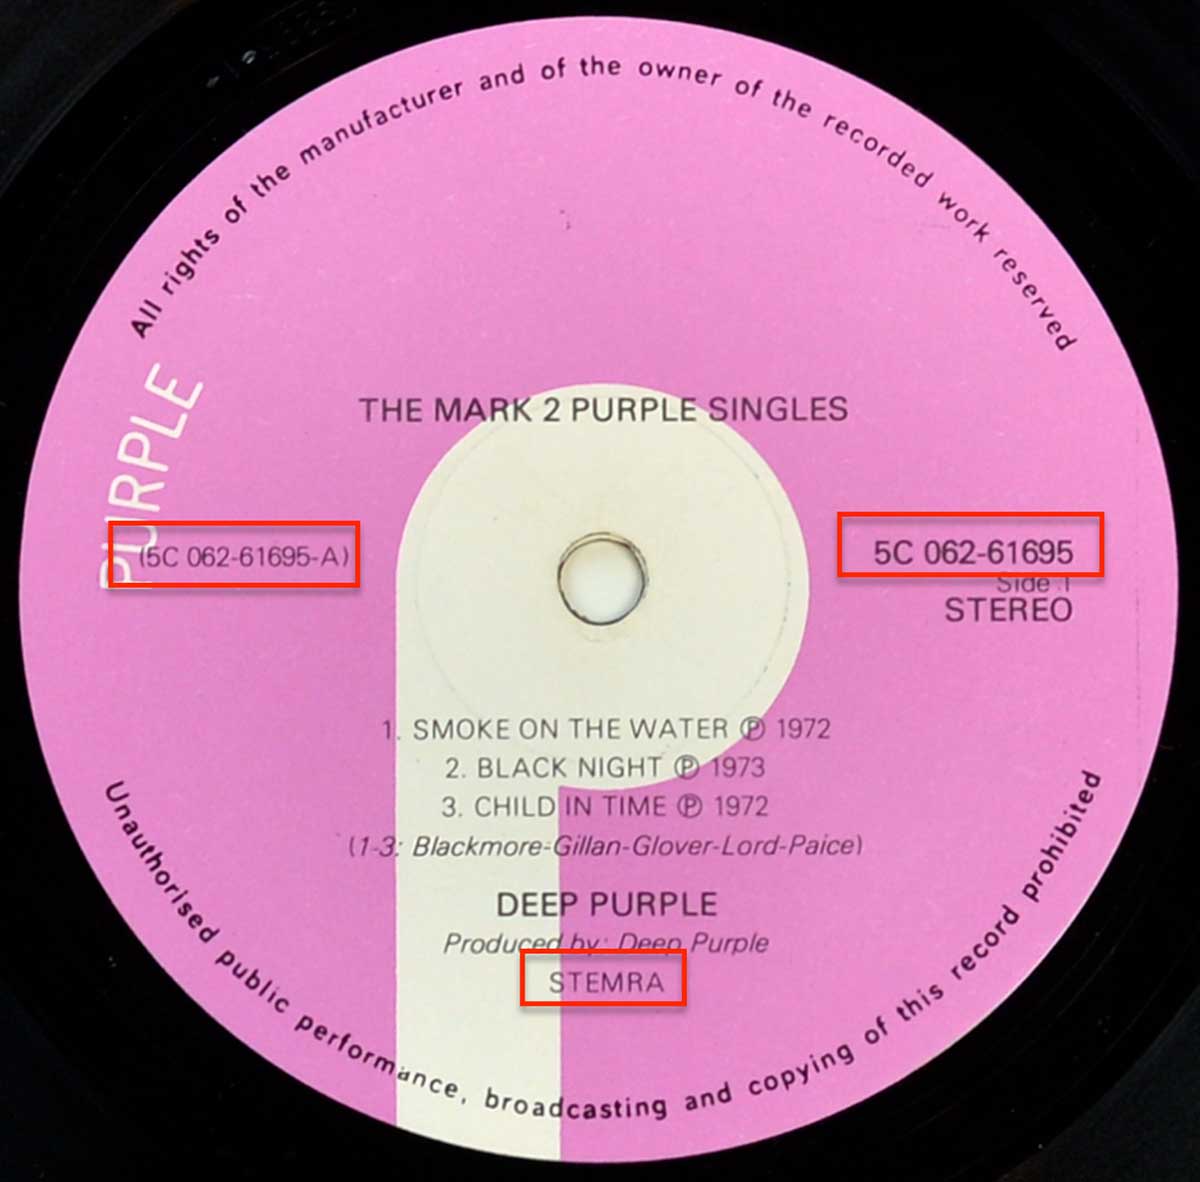 Enlarged High Resolution Photo of the Record's label The Mark 2 Purple Singles https://vinyl-records.nl